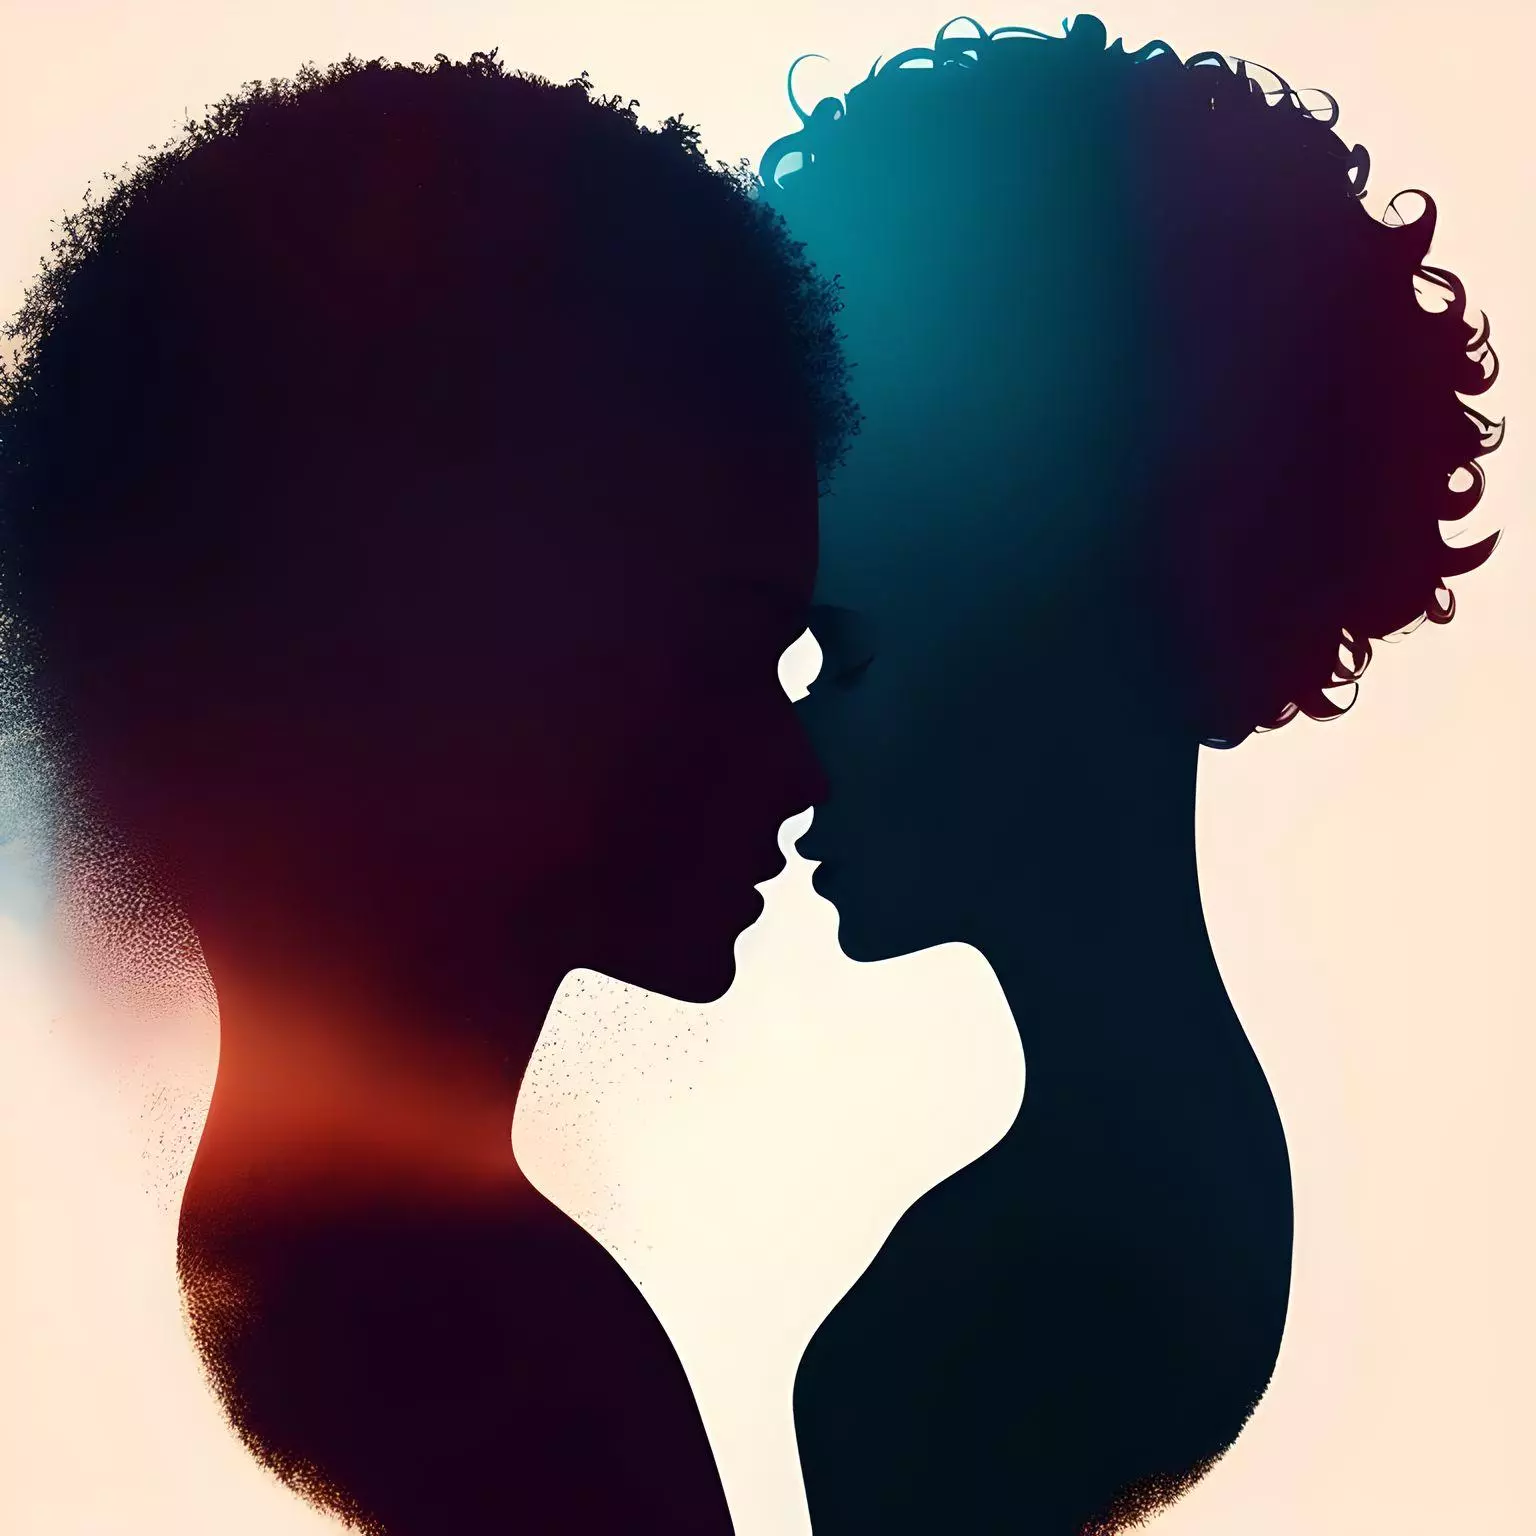 two silhouettes of women kissing. indicative of intimate relationships.